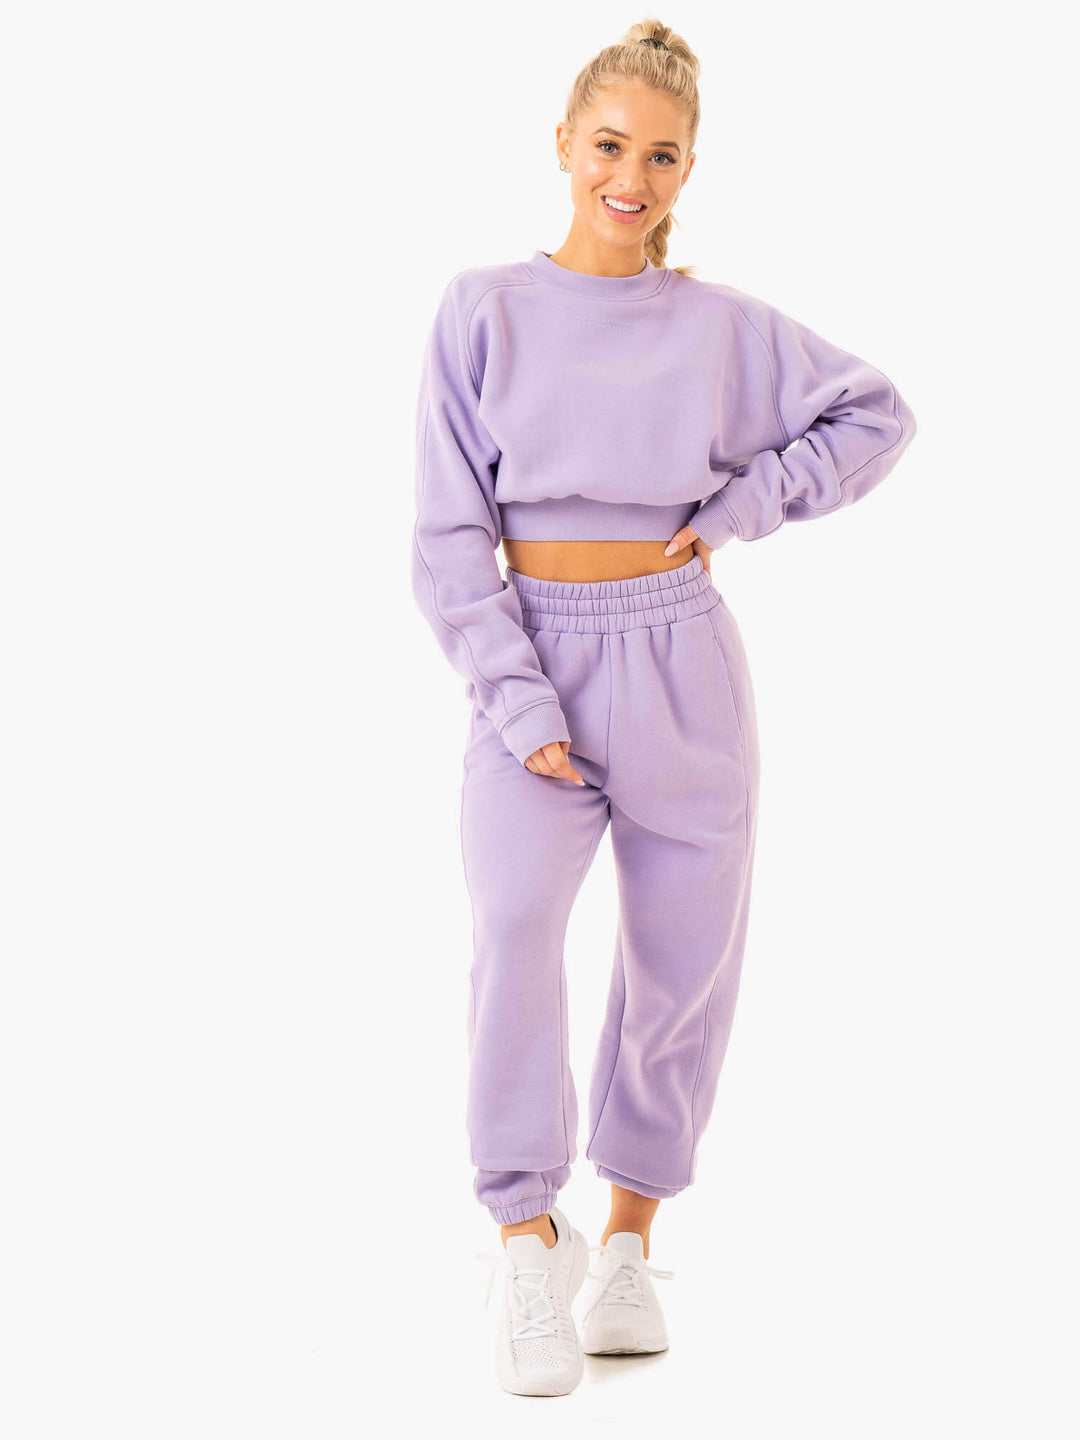 Sideline Sweater - Lilac Clothing Ryderwear 